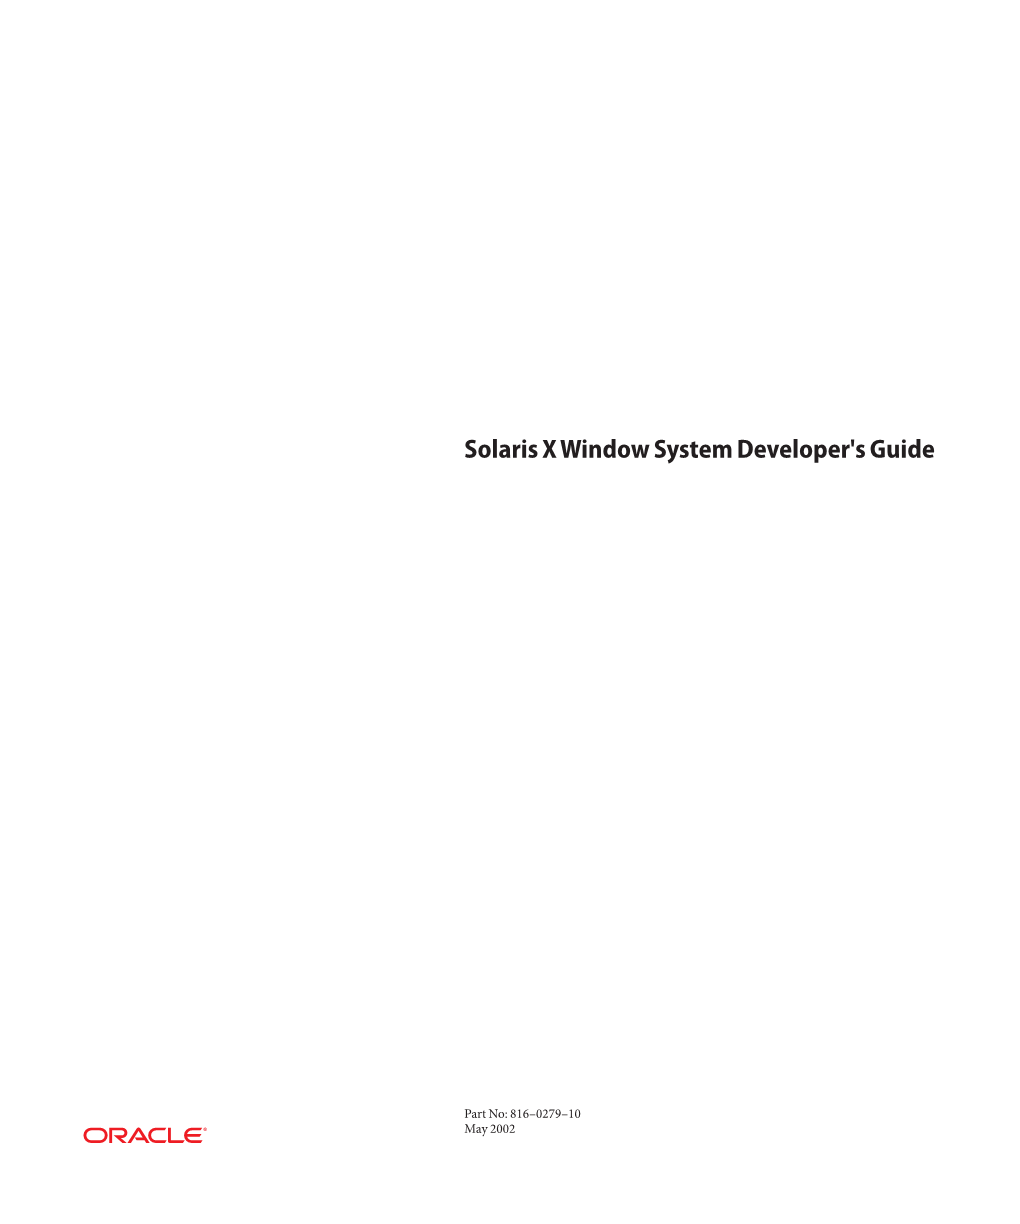 Solaris X Window System Developer's Guide Provides Detailed Information on the Solaris X Server